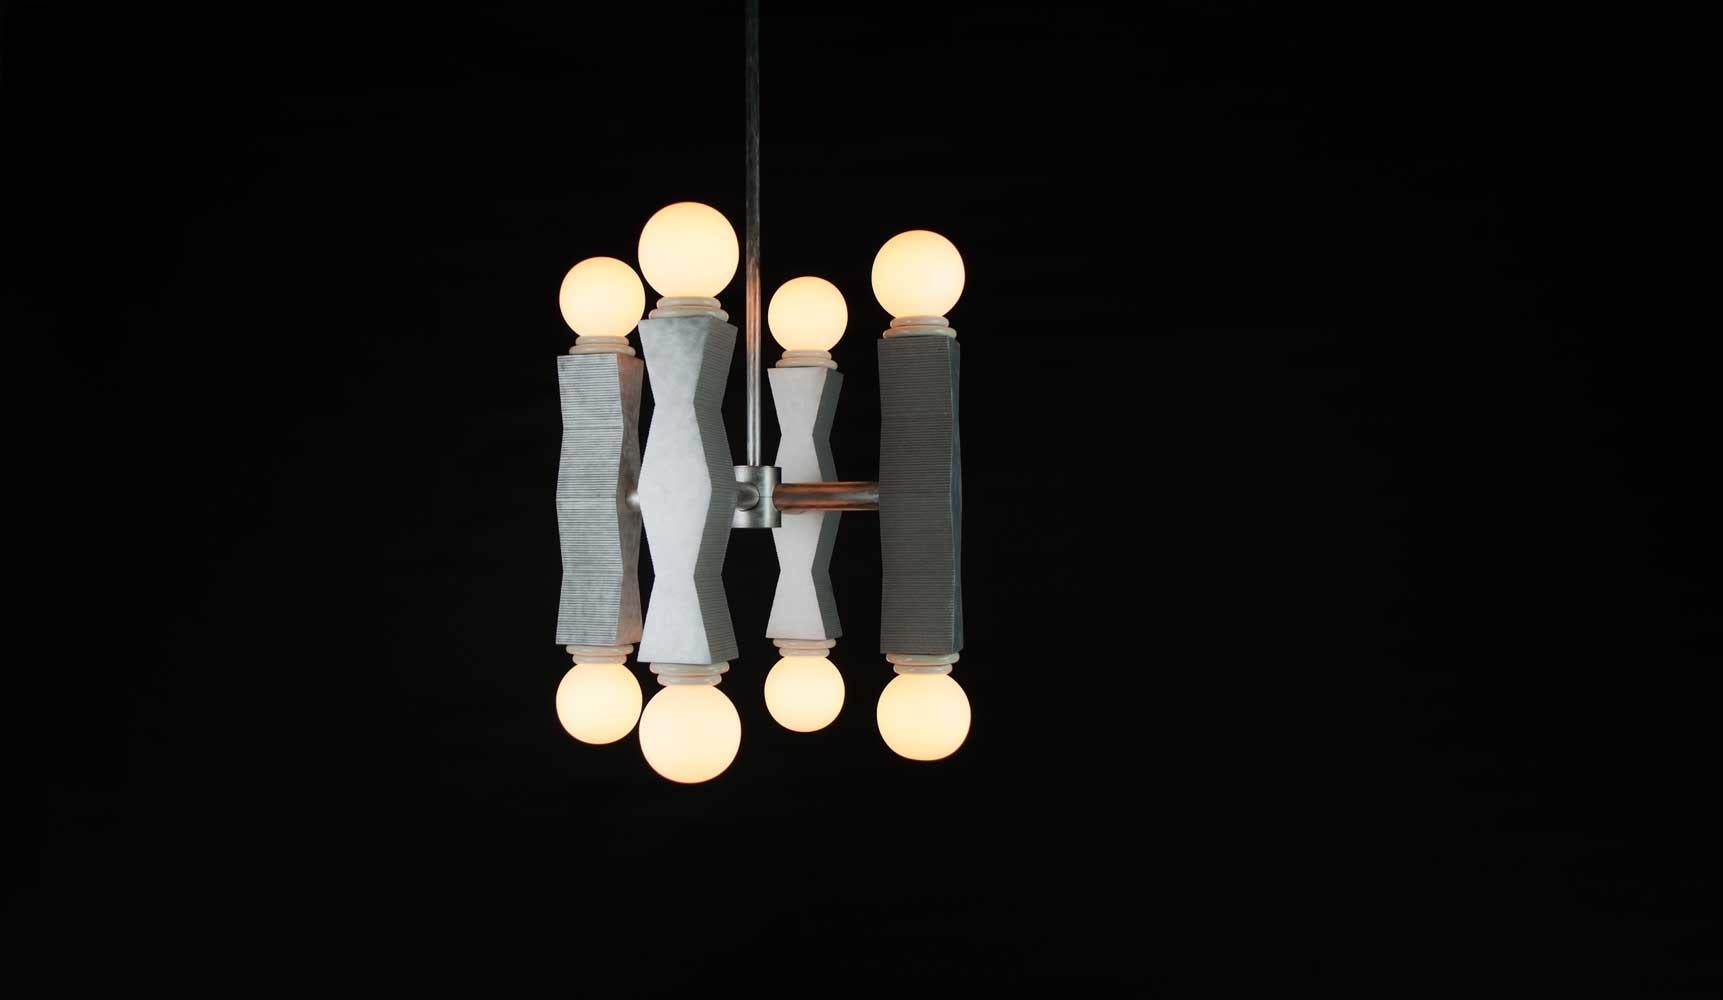 Contemporary Ridge chandelier is made from 4 cast aluminium columns composed into a cross formation with cream necks and matte globes. Each column is individually cast by hand highlighting the raw aluminium qualities. 

The geometric shapes echo